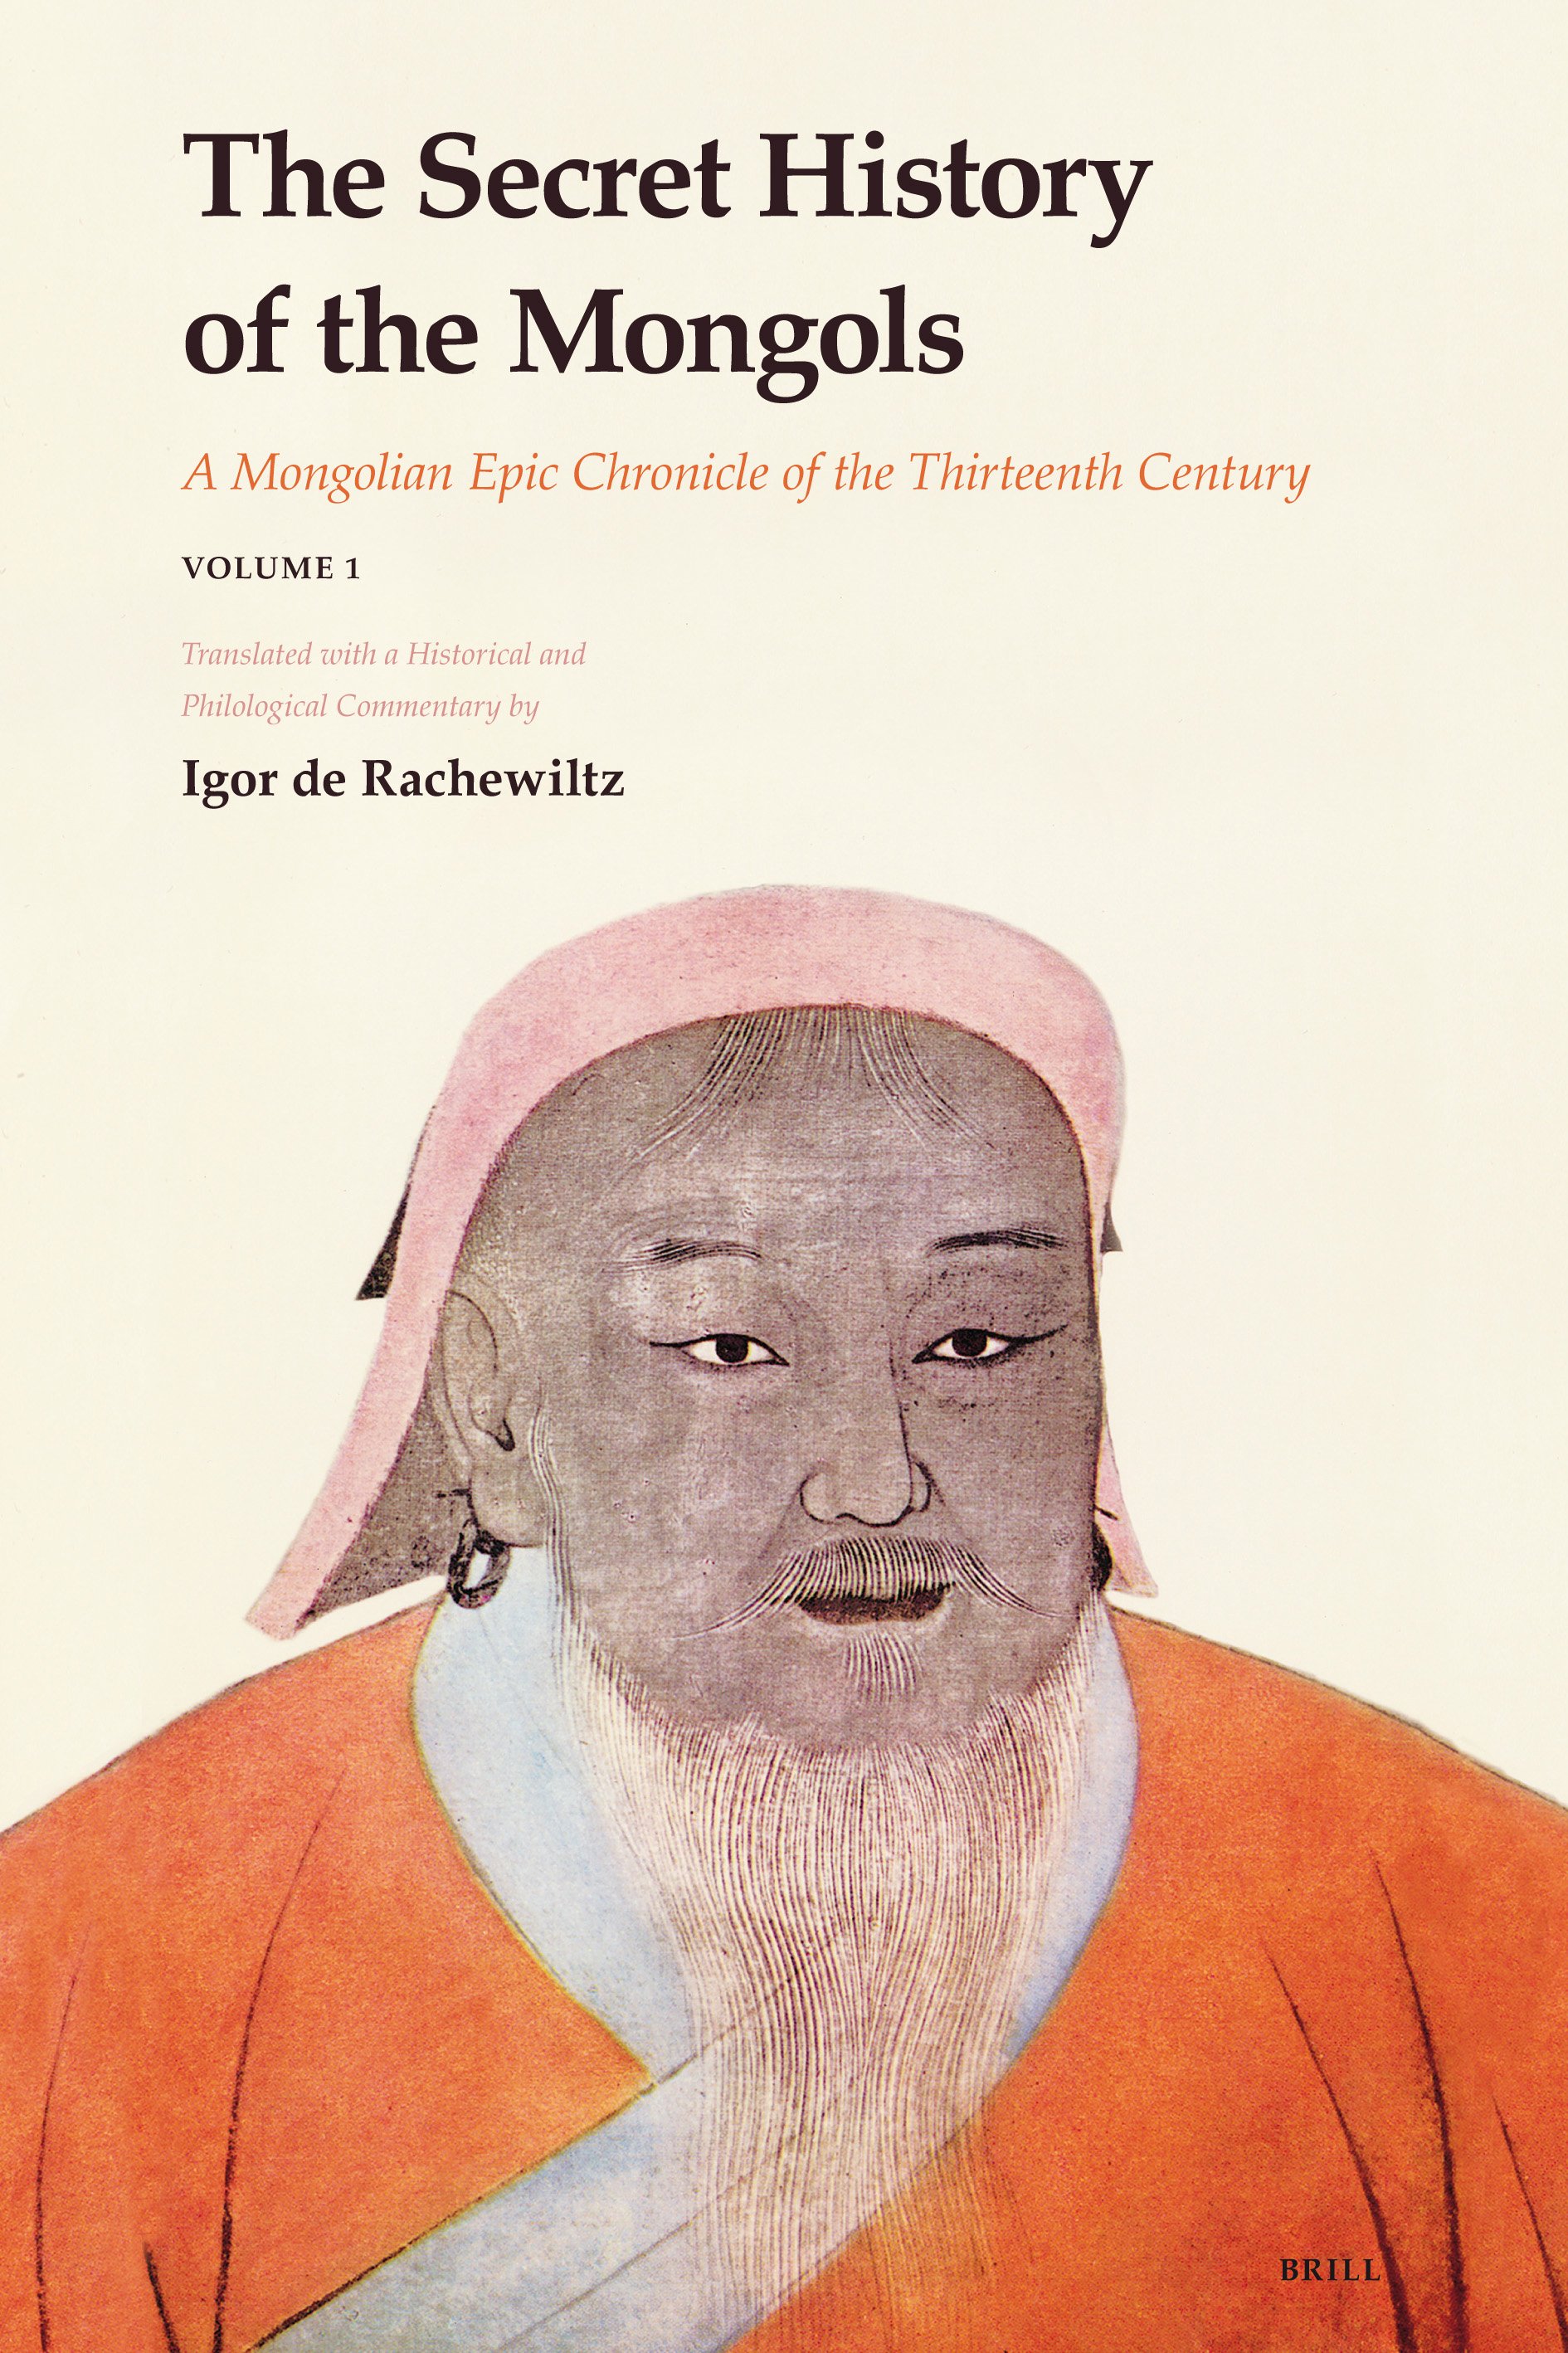 'The Secret History of the Mongols' placed at Library of Congress